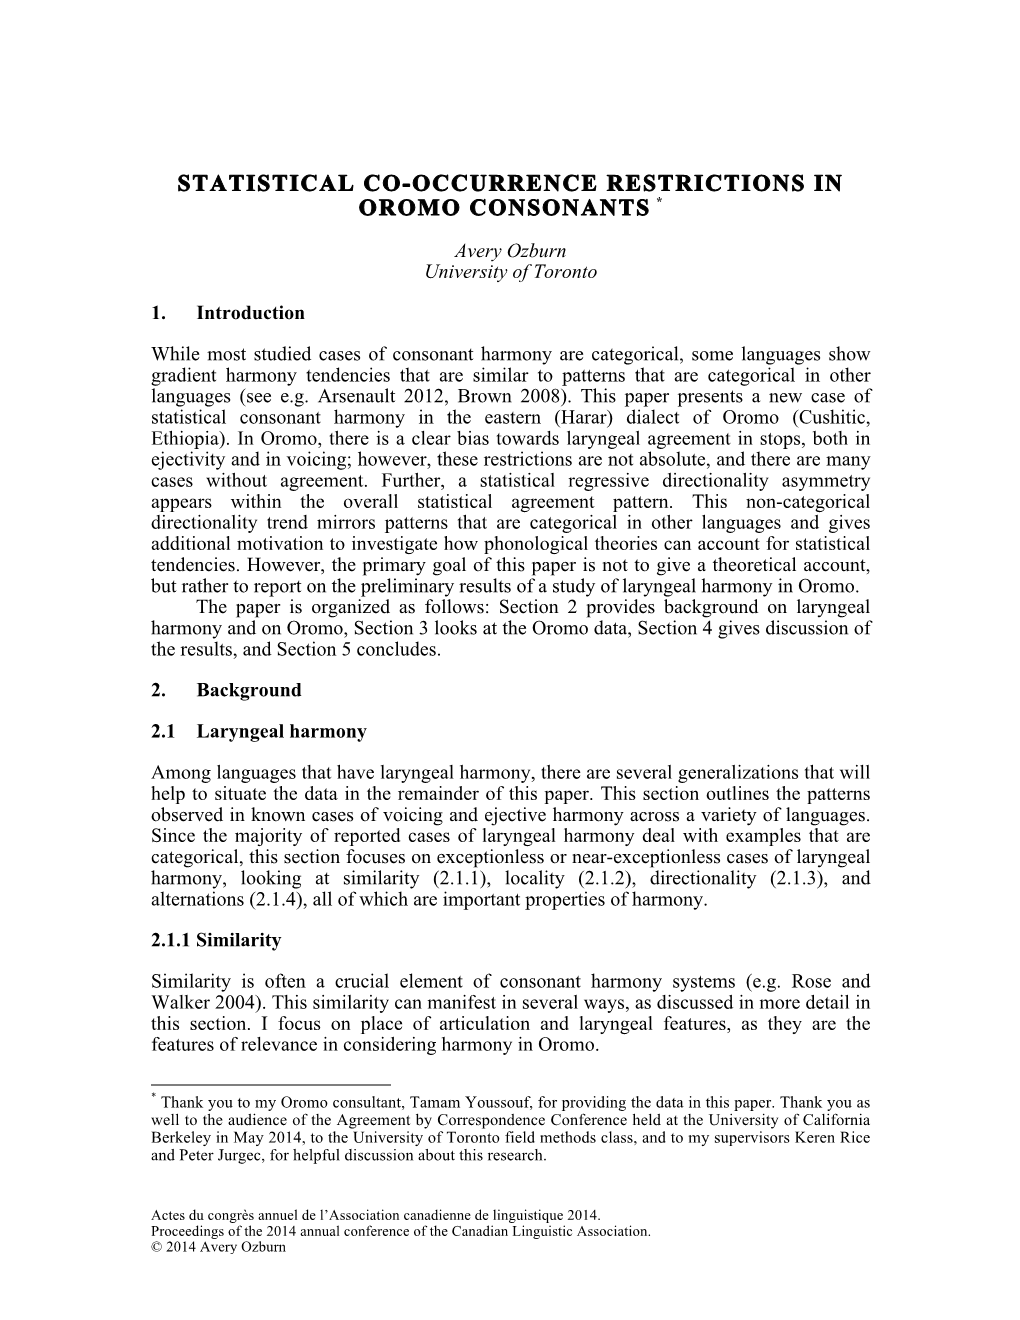 Statistical Co-Occurrence Restrictions in Oromo Consonants *